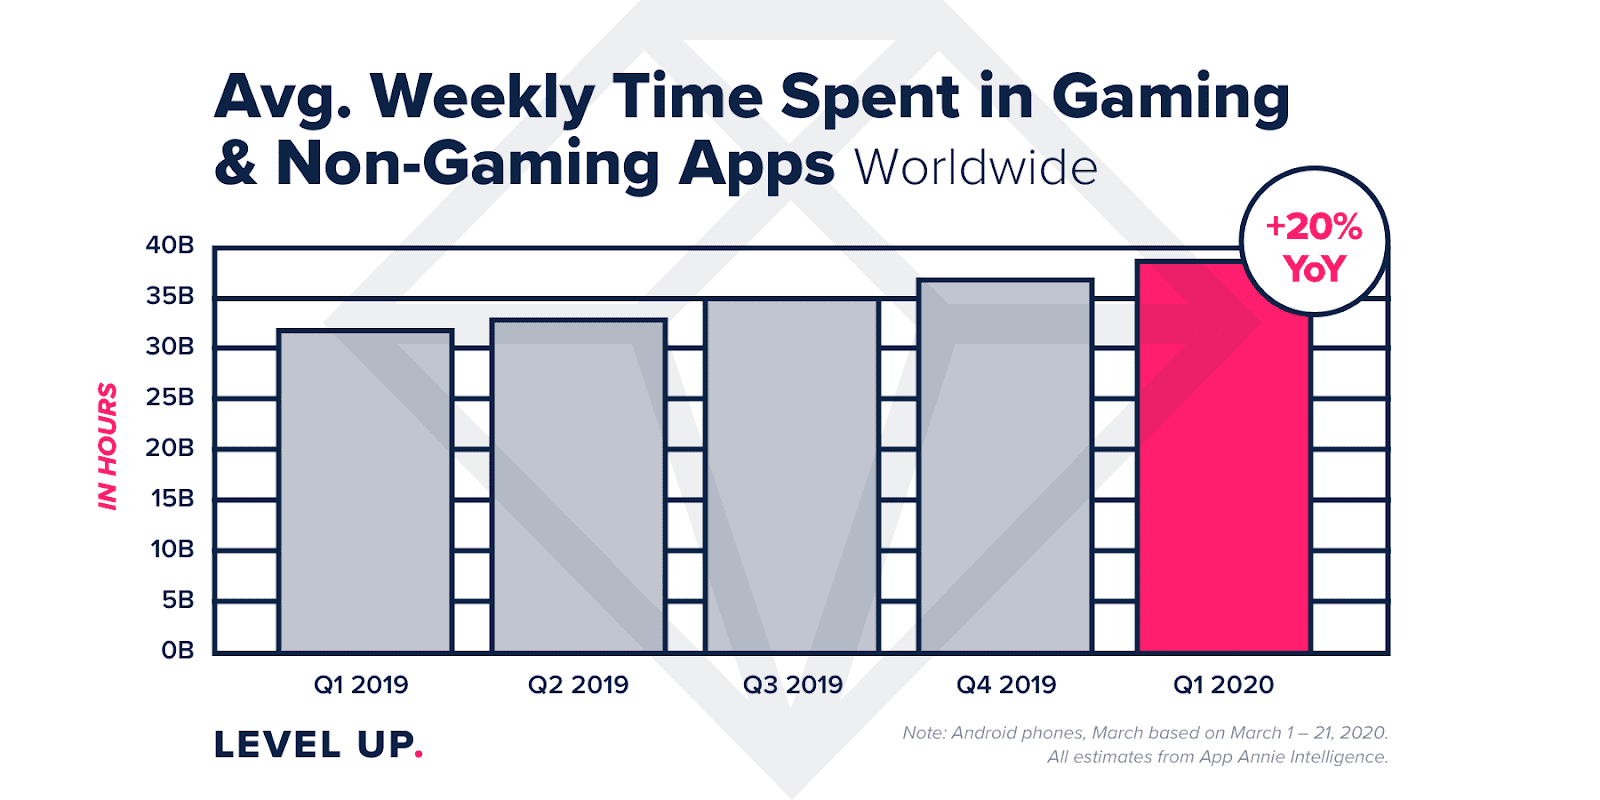 Bar graph of the average weekly time spent in gaming and non-gaming apps worldwide with hours increasing from Q1 2019 to Q1 2020